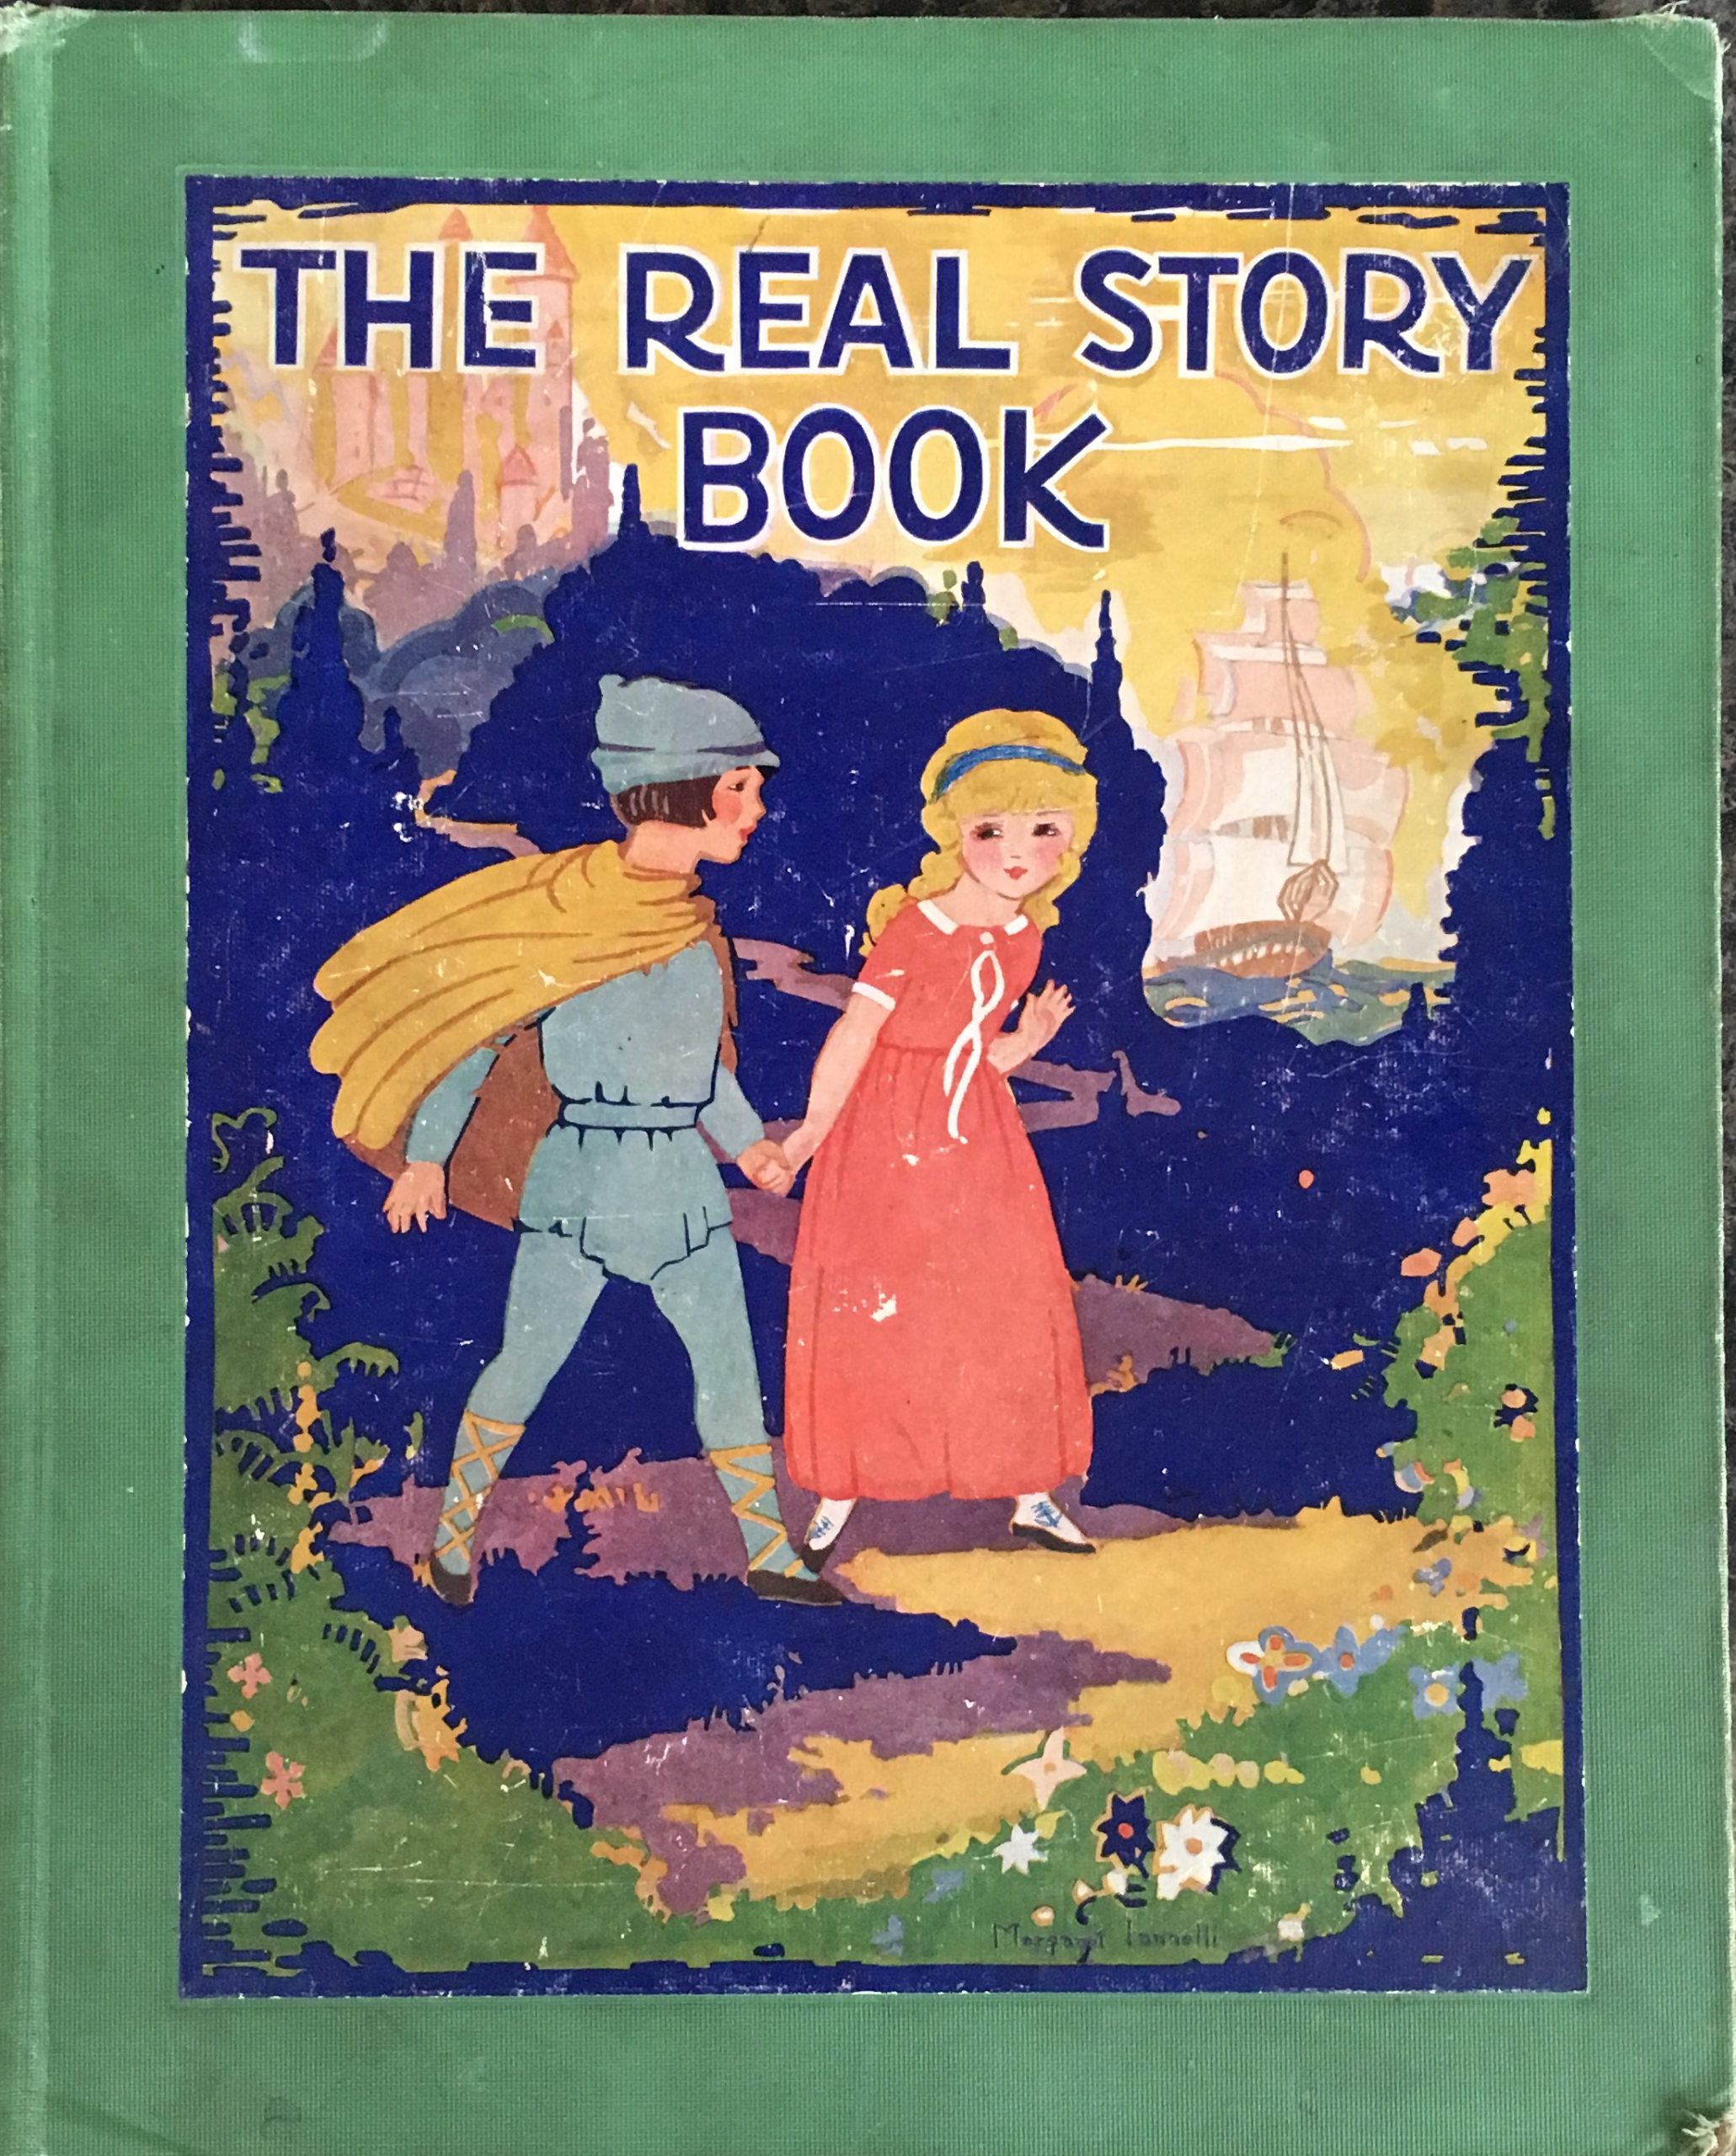 Cover of "The Real Story Book"